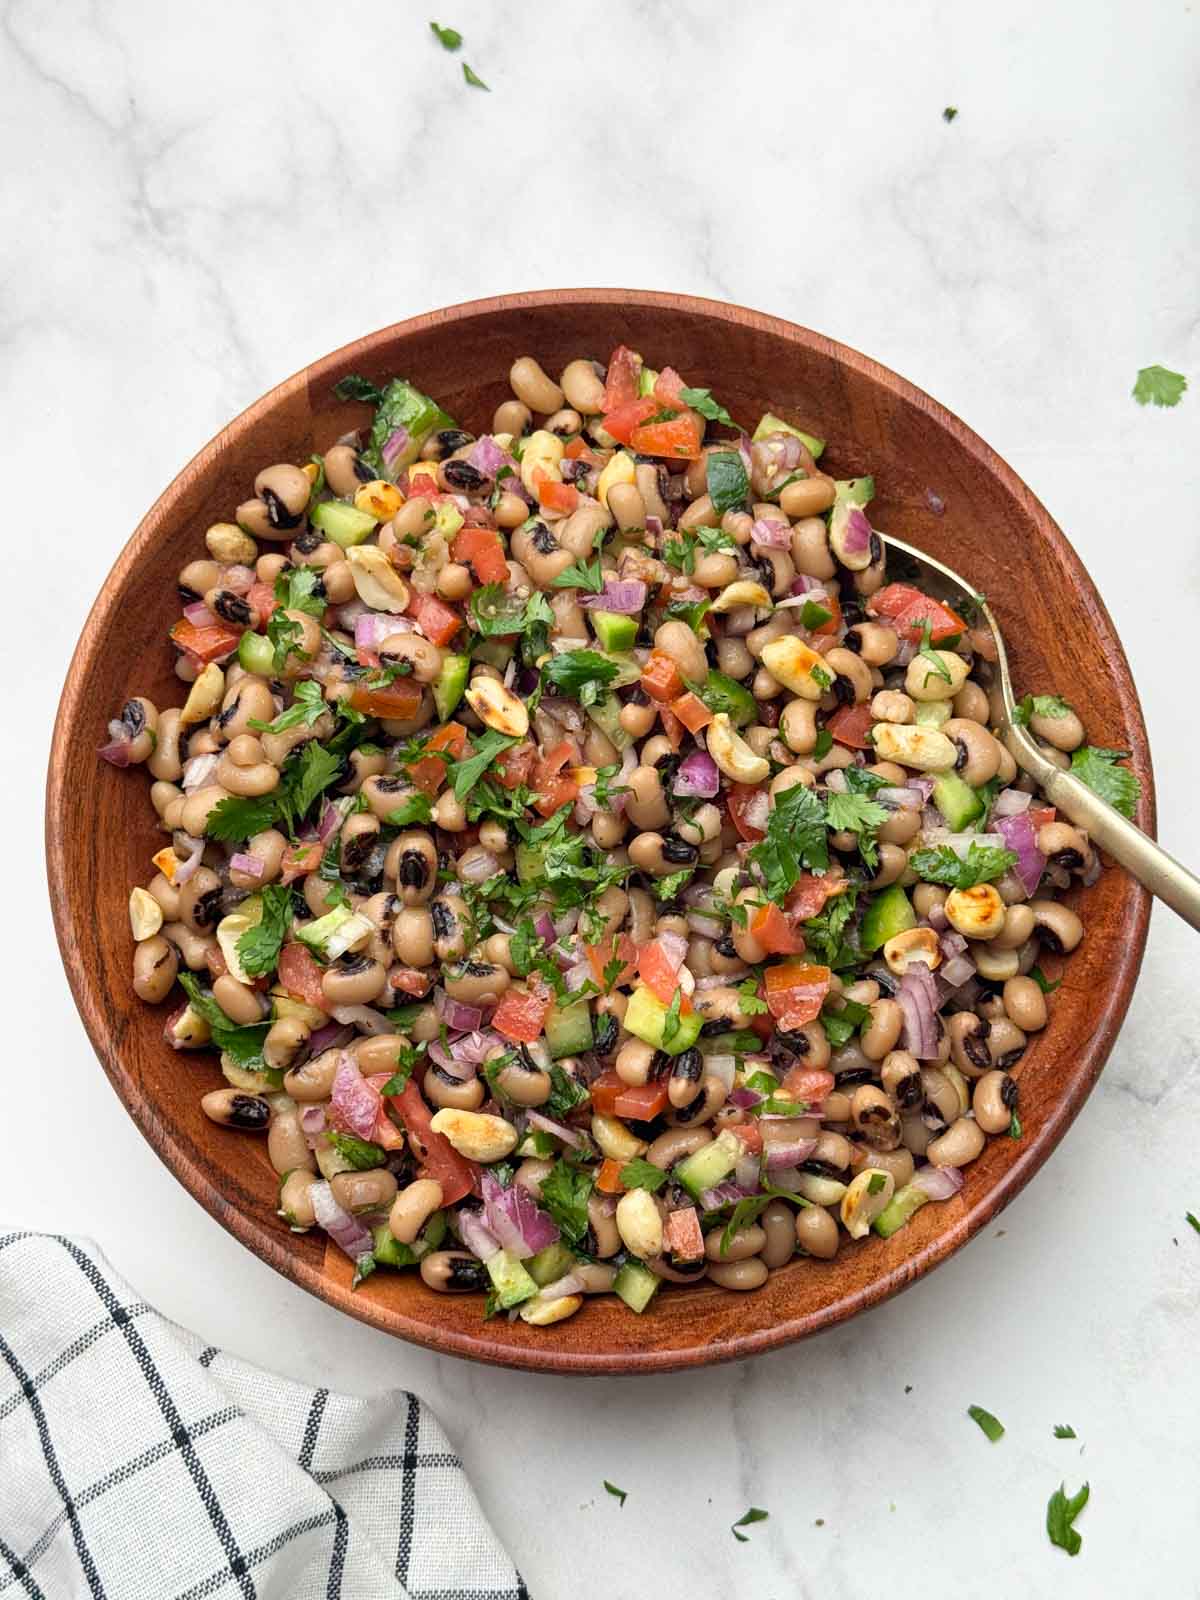 black eyed peas salad (lobia chaat) served in a wooden bowl with a spoon